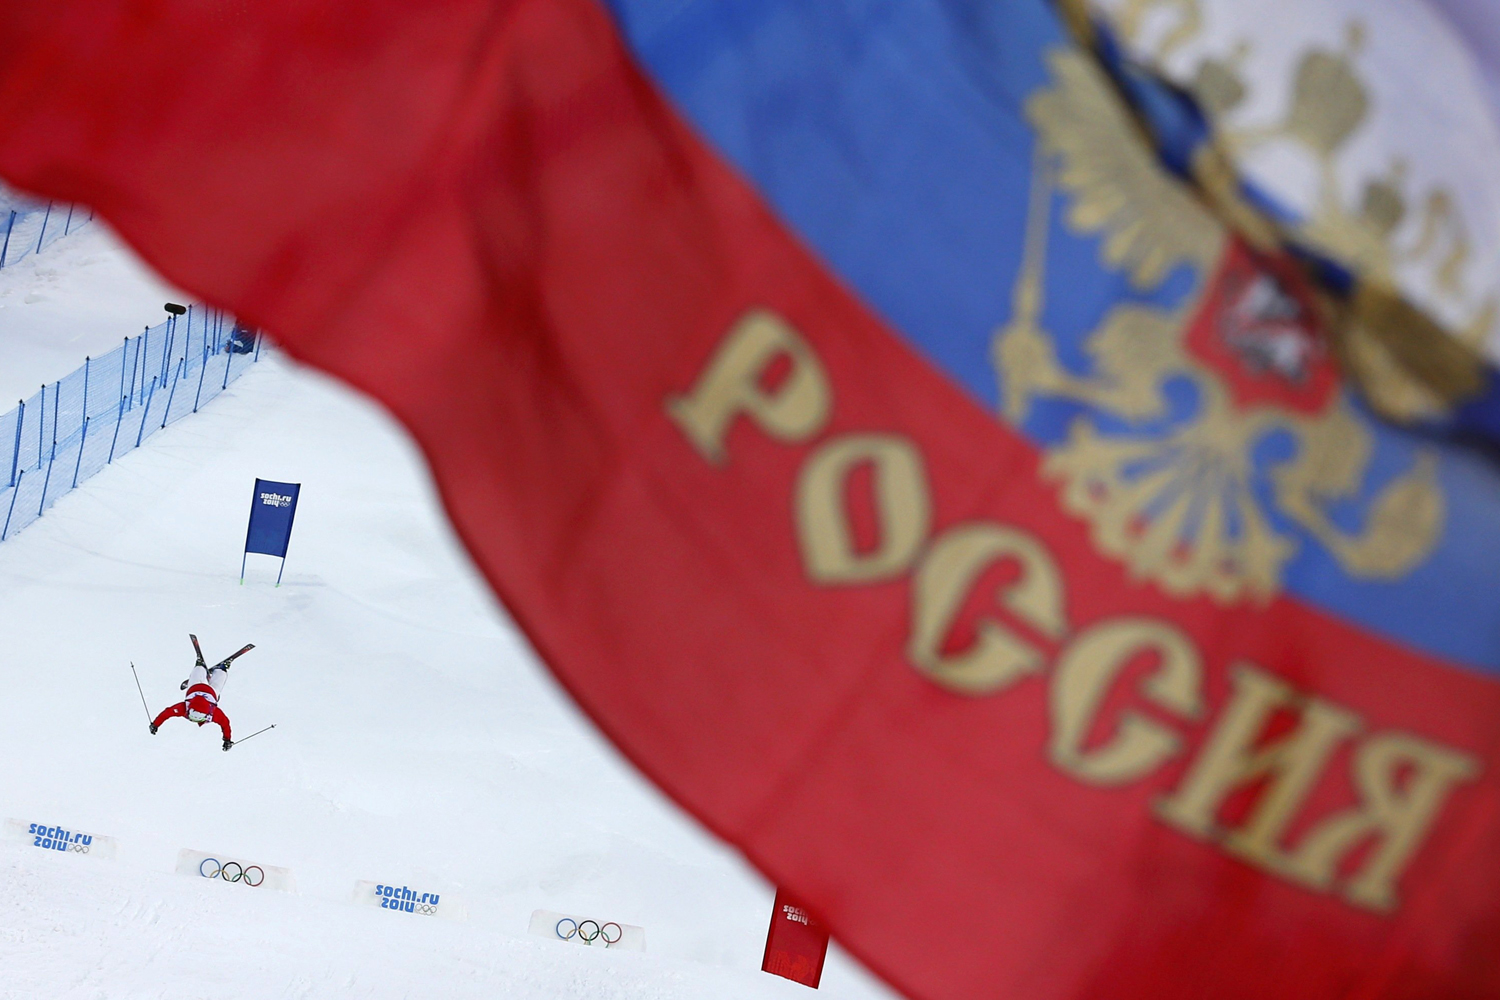 Vaculikova of the Czech Republic performs a jump during the women's freestyle skiing moguls qualification round at the Sochi 2014 Winter Olympics in Rosa Khutor